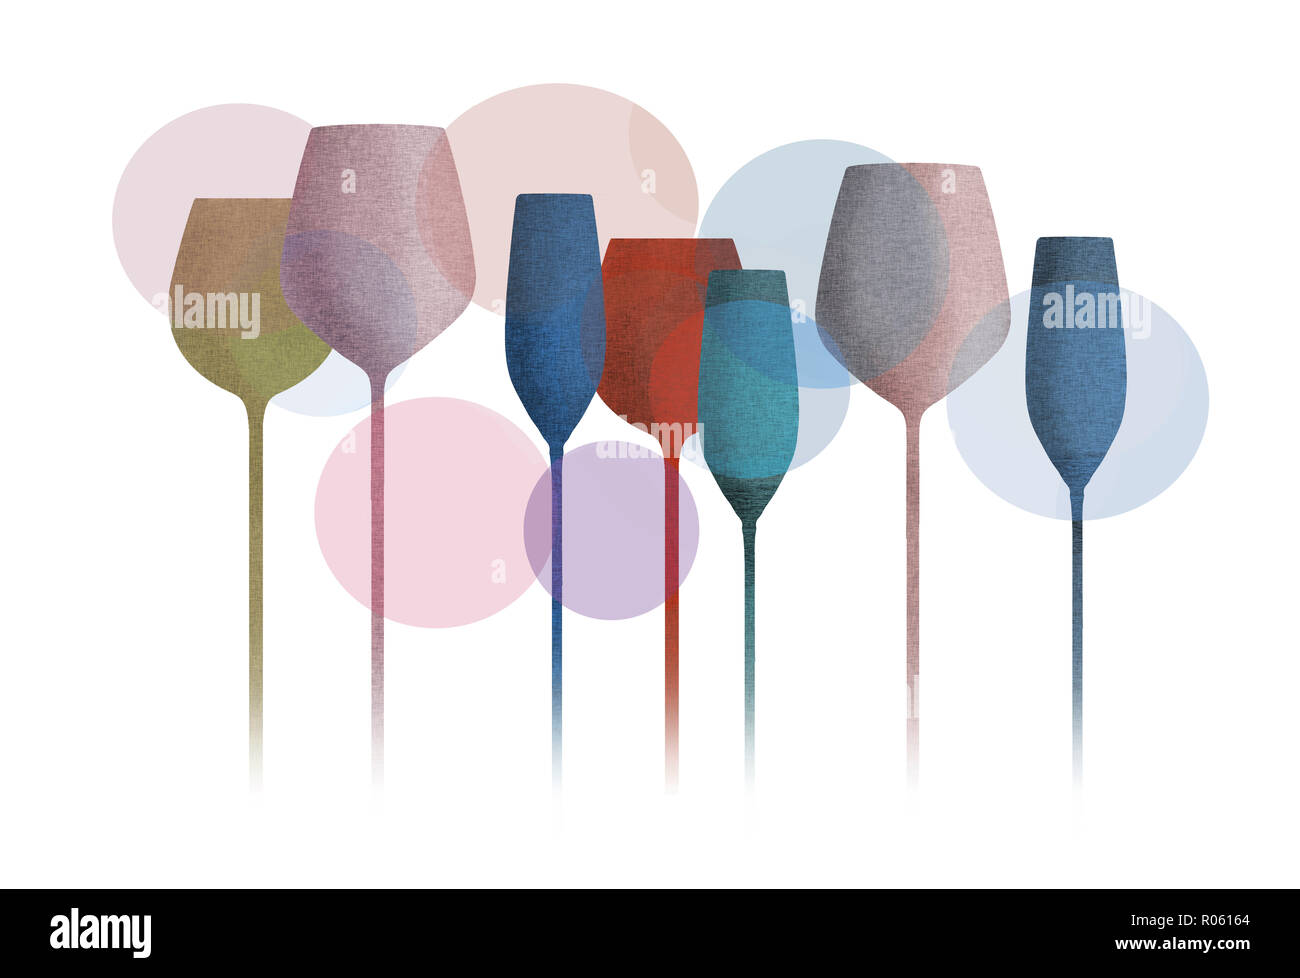 Here is a graphic artwork of stemware glasses. Long stem glasses for wine, champagne etc. are seen with texture and color. Stock Photo